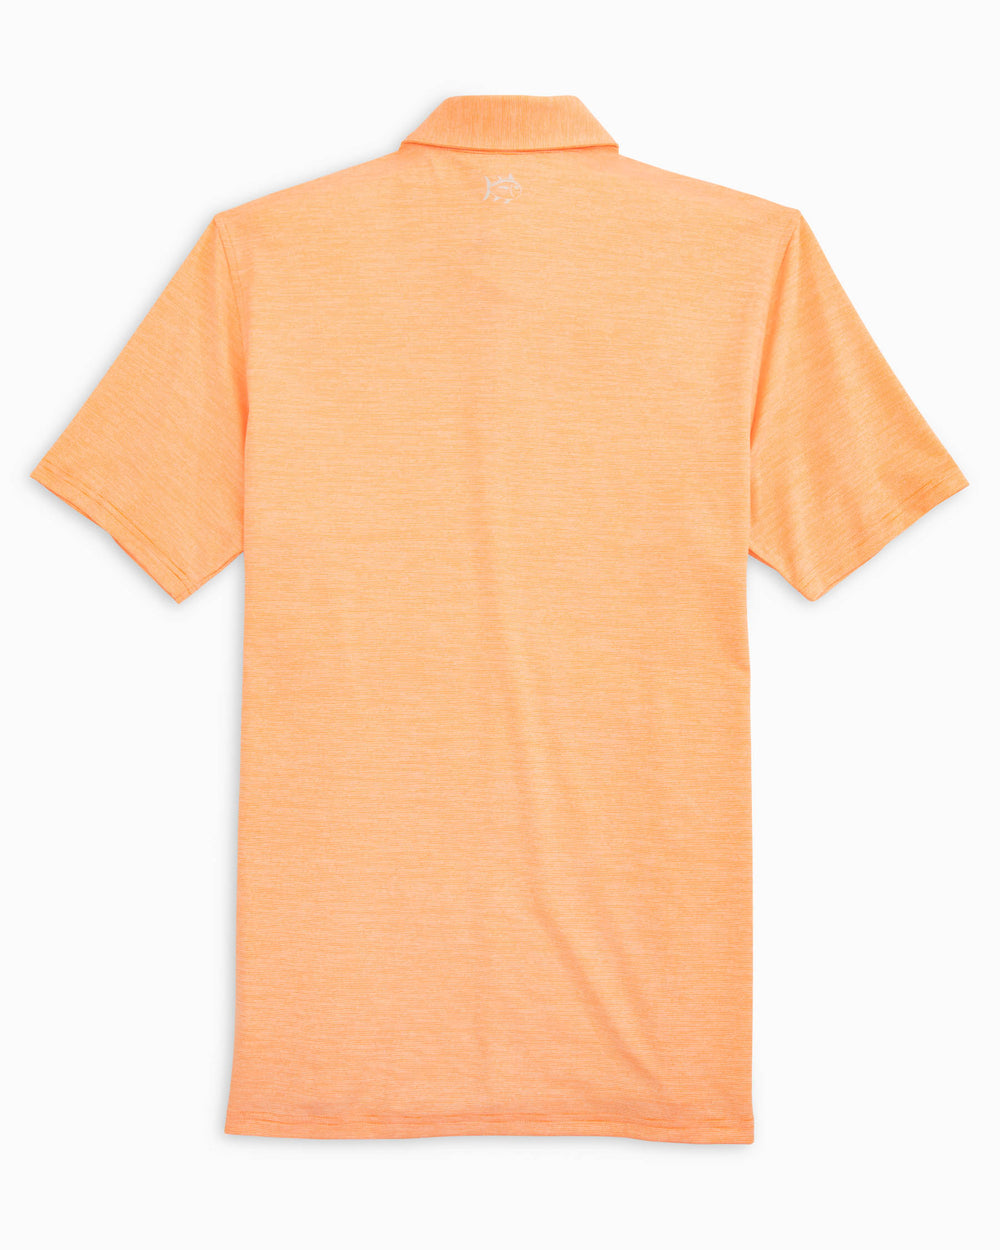 The back view of the Tennessee Vols Driver Spacedye Polo Shirt by Southern Tide - Rocky Top Orange